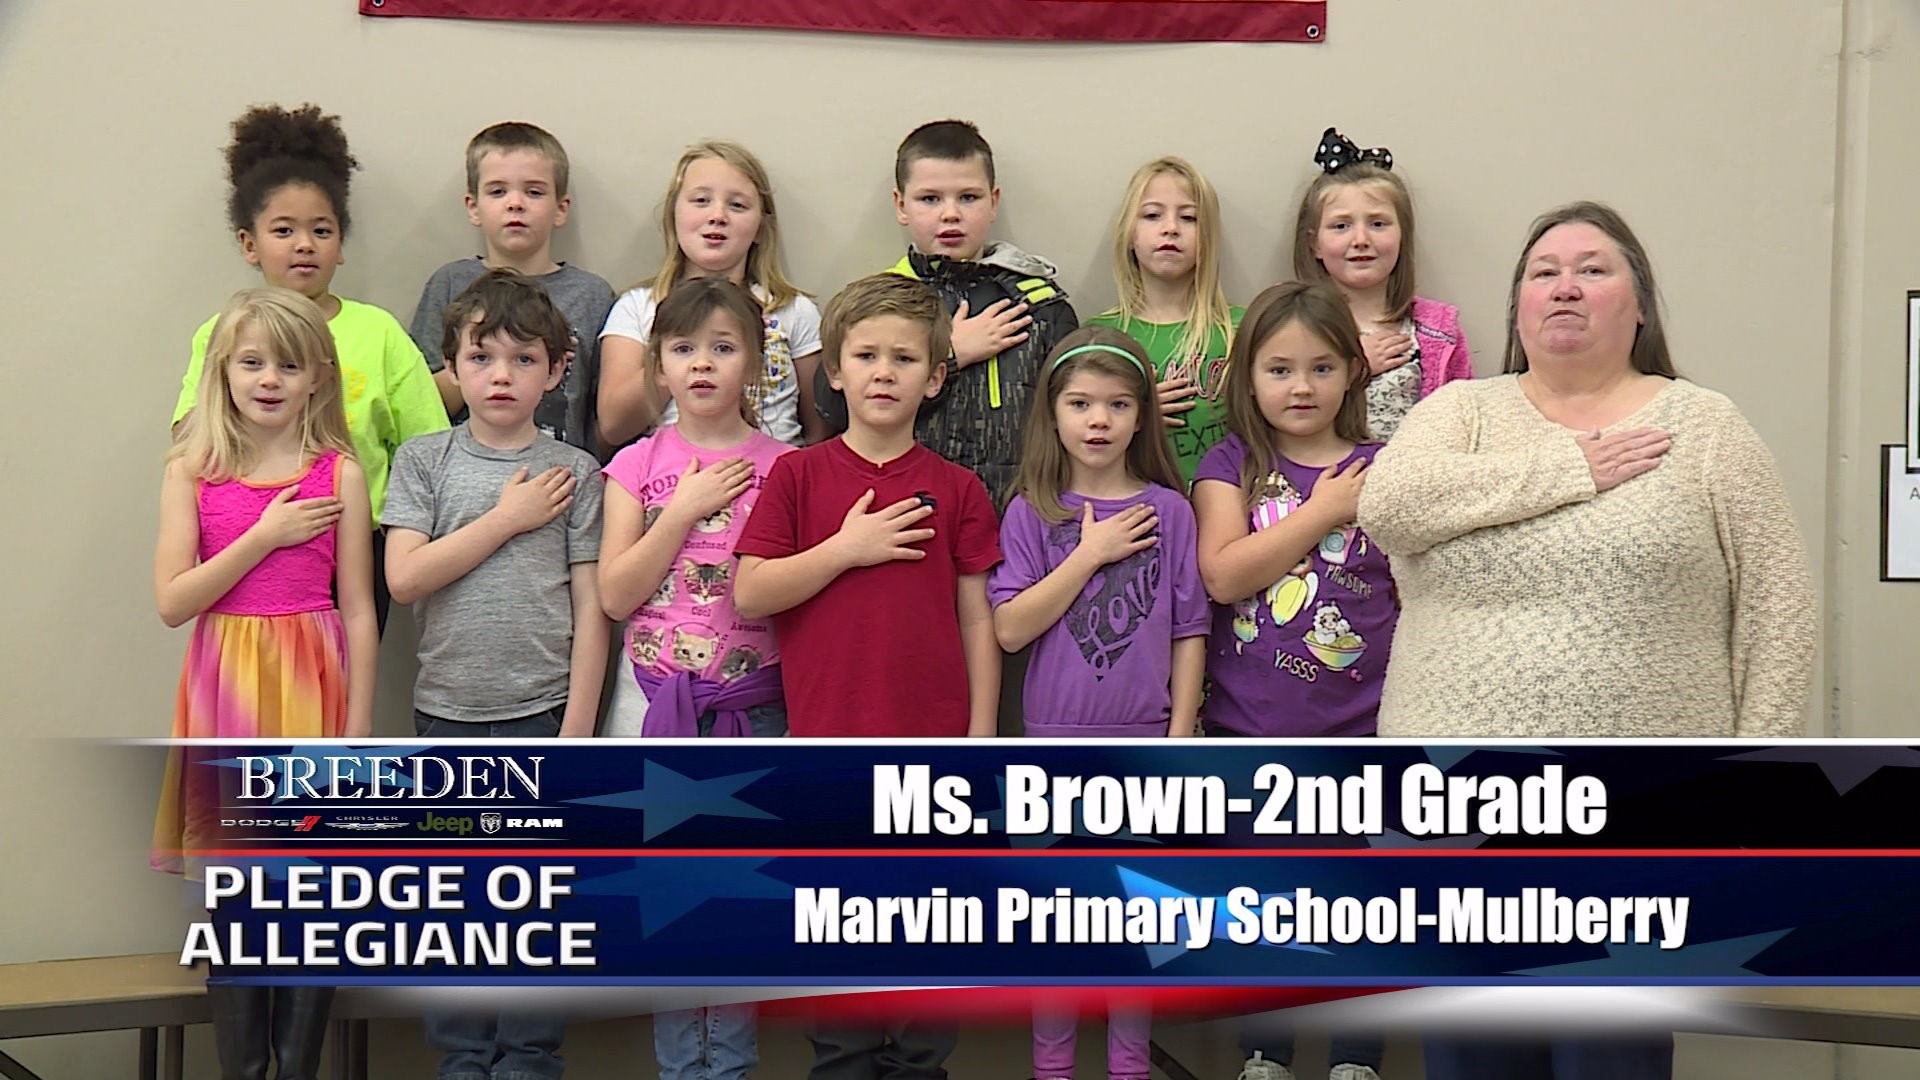 Ms. Brown  2nd Grade Marvin Primary School, Mulberry